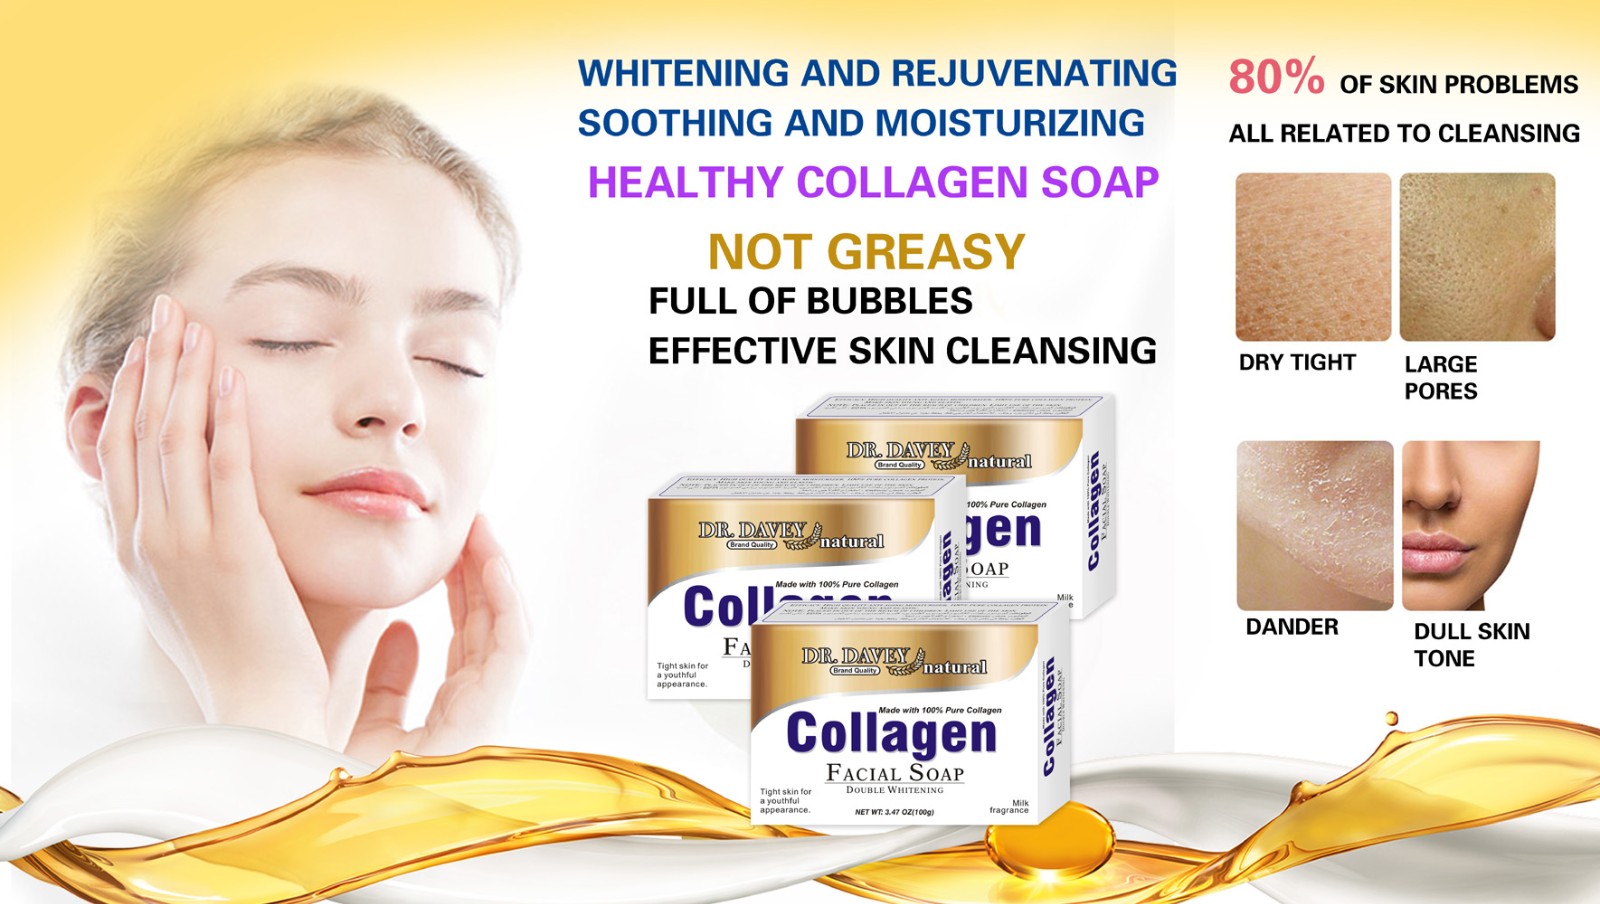 DR.DAVEY  Collagen Facial Soap Nourishing Cleaning Skin Care